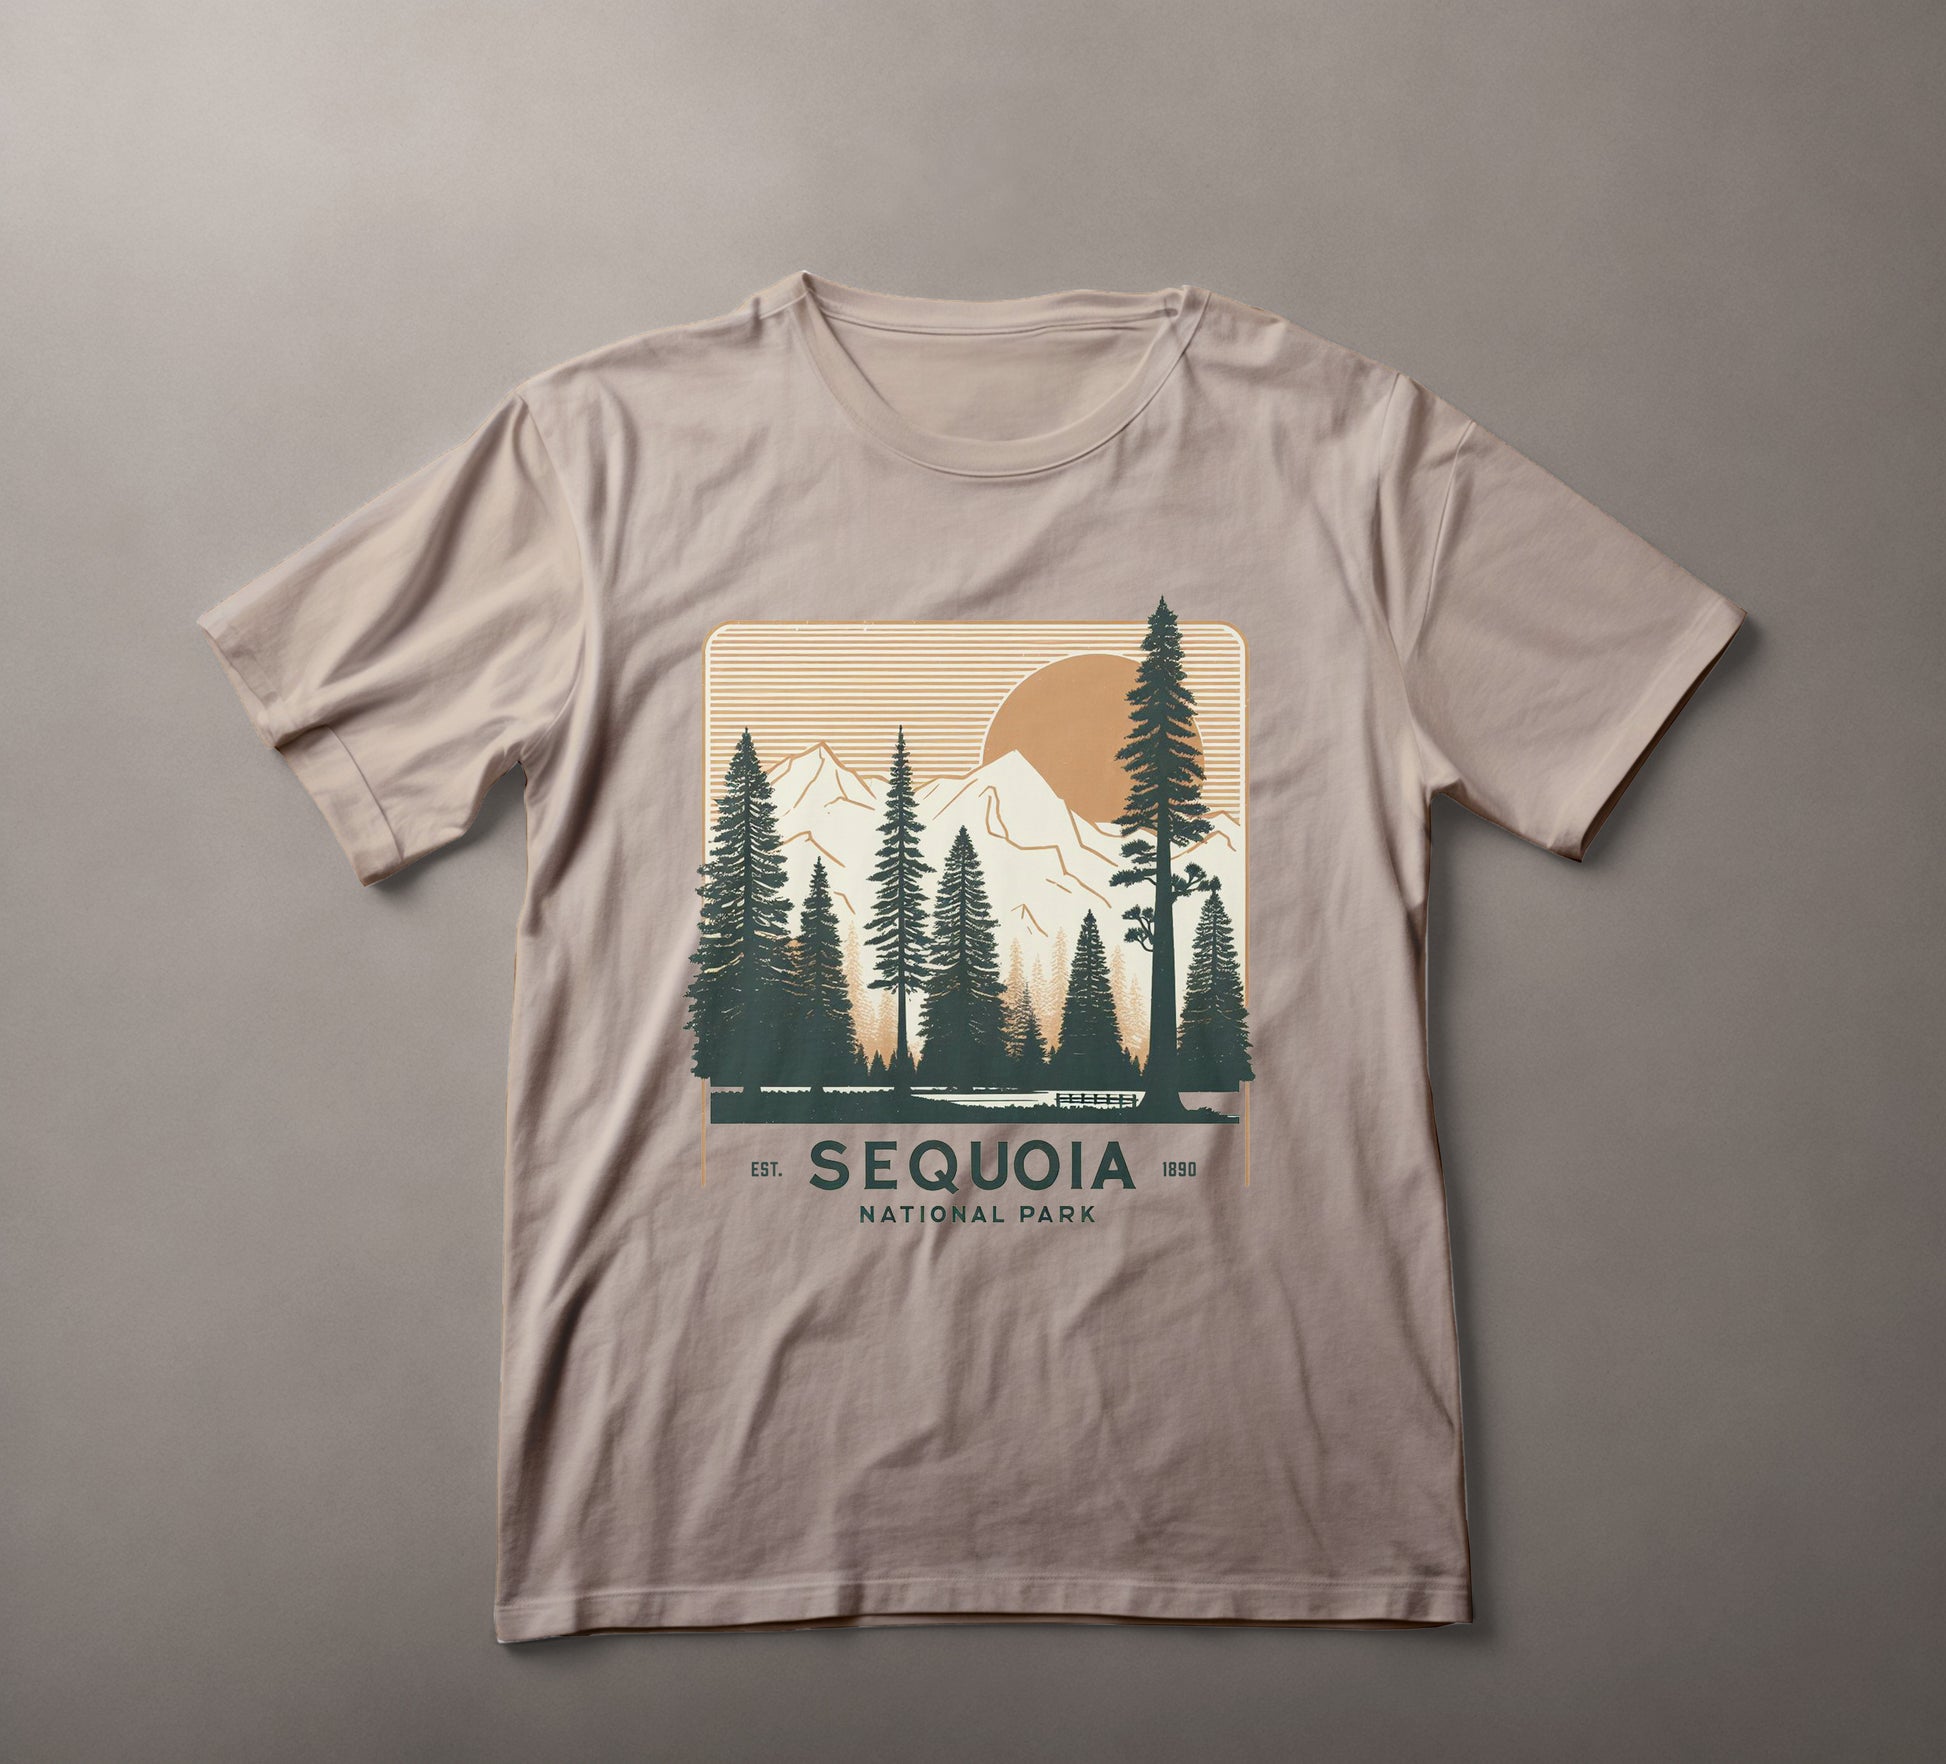 Sequoia National Park, retro poster style, tall evergreen trees, mountain scenery, nature tee, vintage travel design, wilderness graphic, outdoor adventure, sunset backdrop, hiking apparel